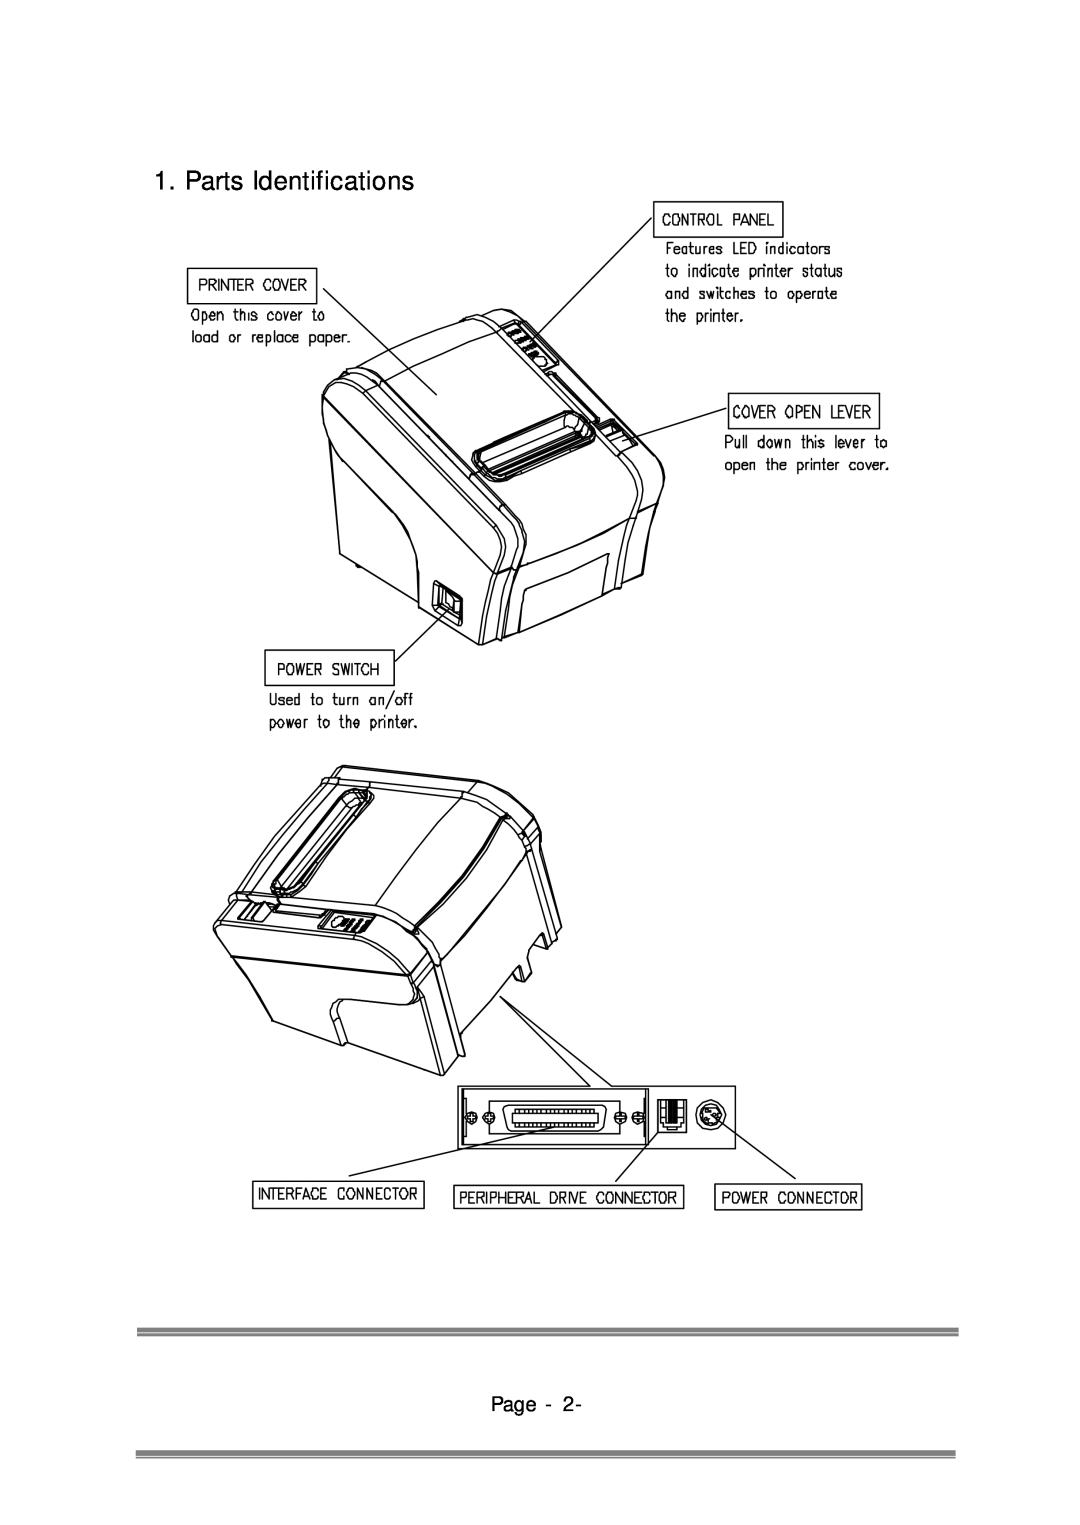 Epson RP-310, RP-300 user manual Parts Identifications, Page 